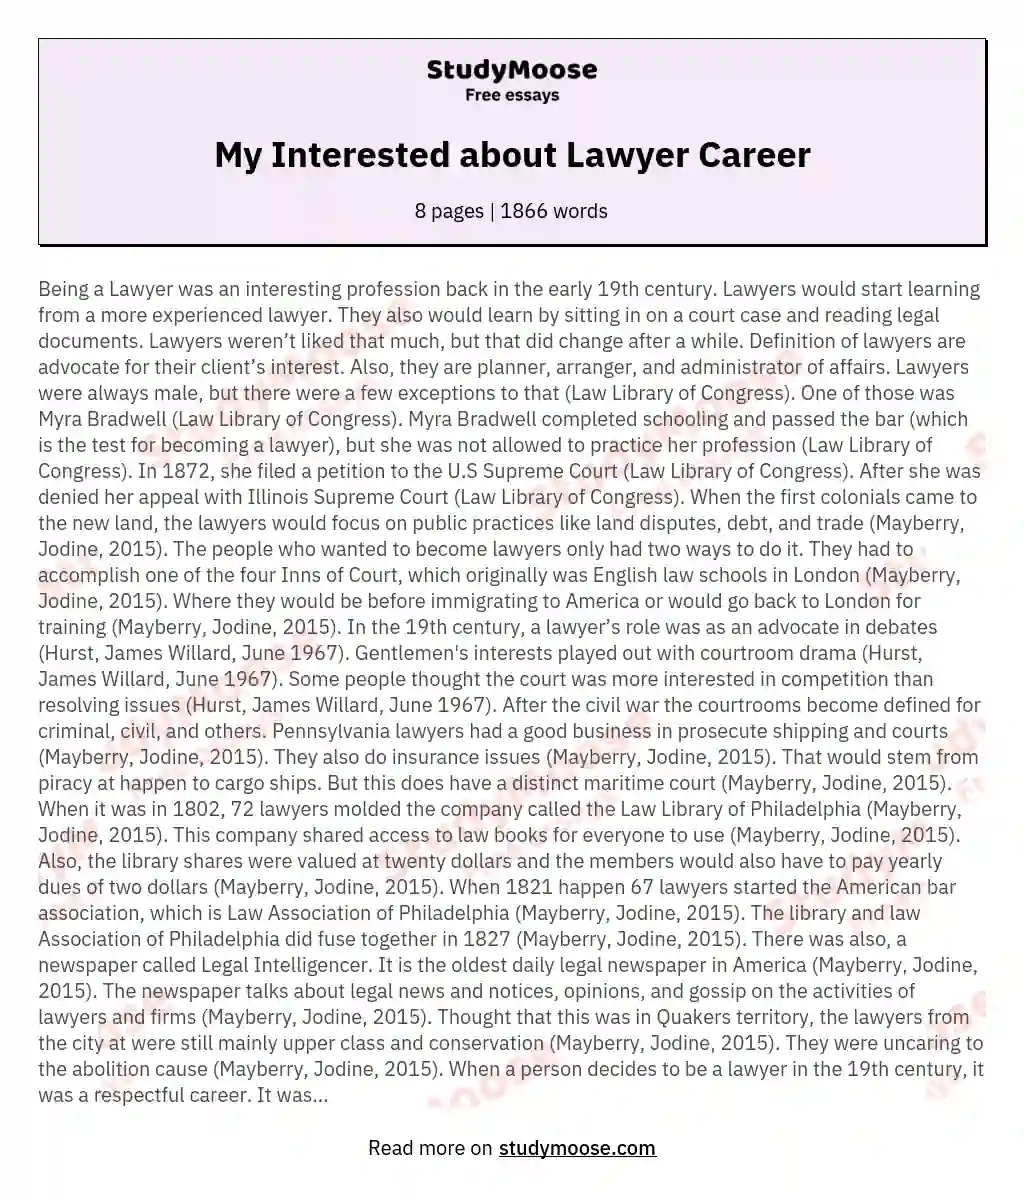 My Interested about Lawyer Career essay